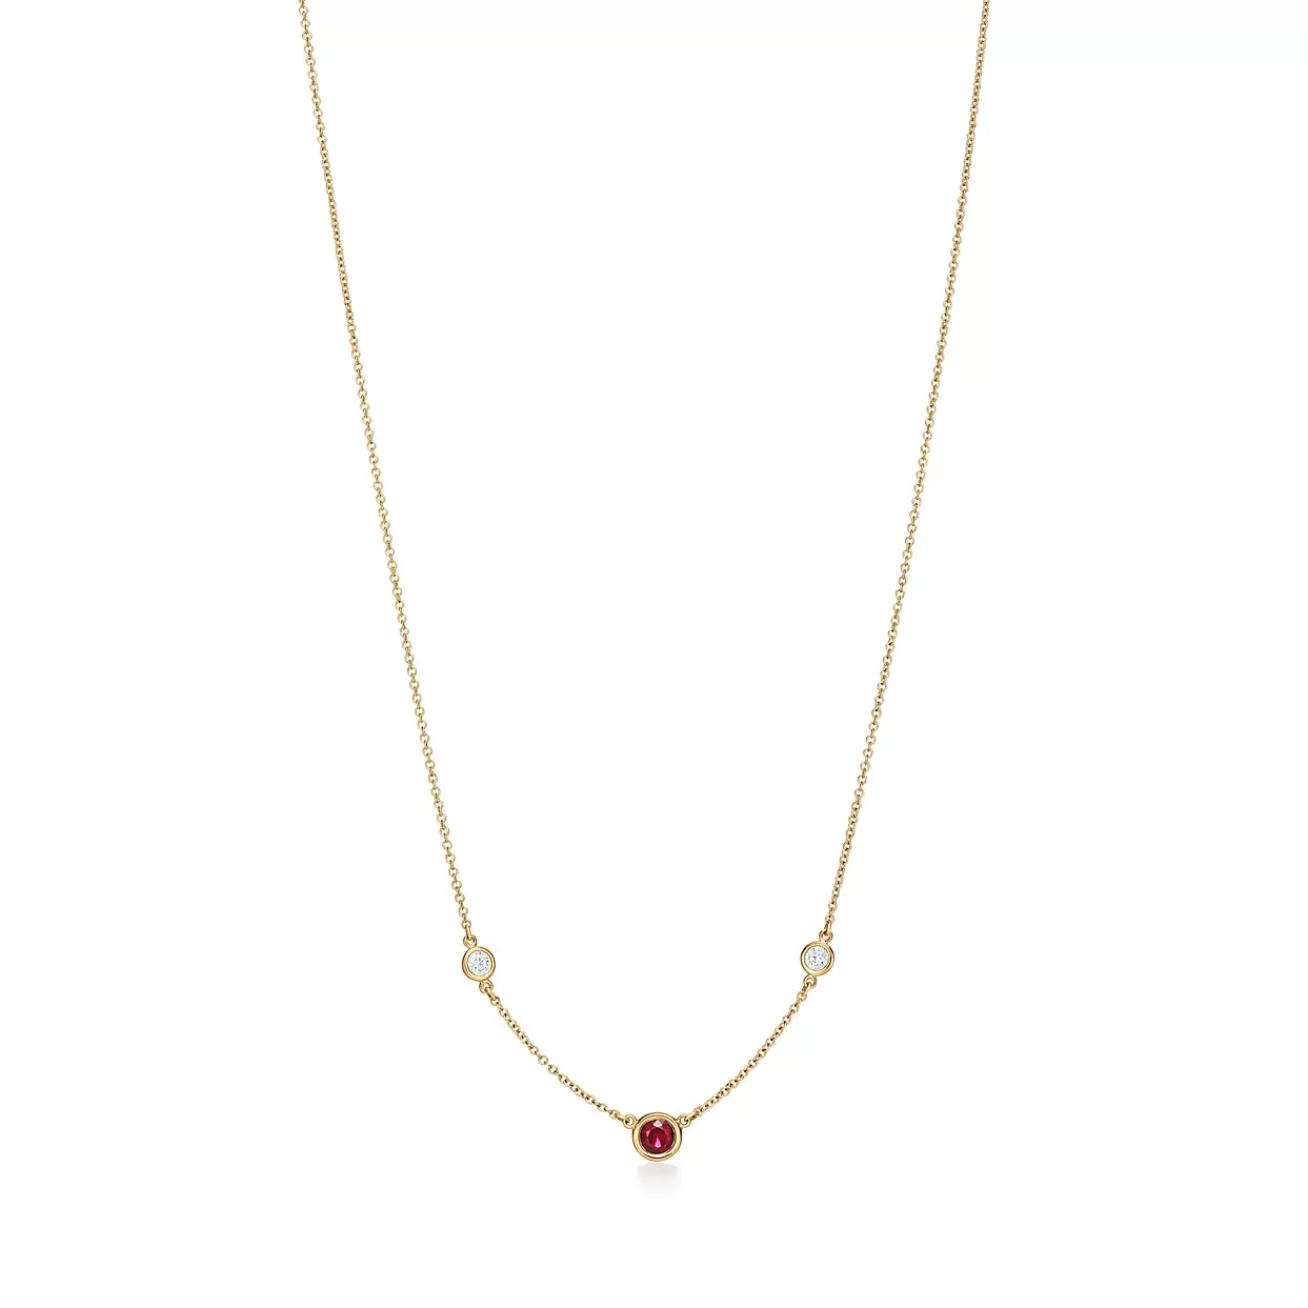 Tiffany & Co. Elsa Peretti® Color by the Yard necklace in 18k gold with a ruby and diamonds. | ^ Necklaces & Pendants | Gifts for Her